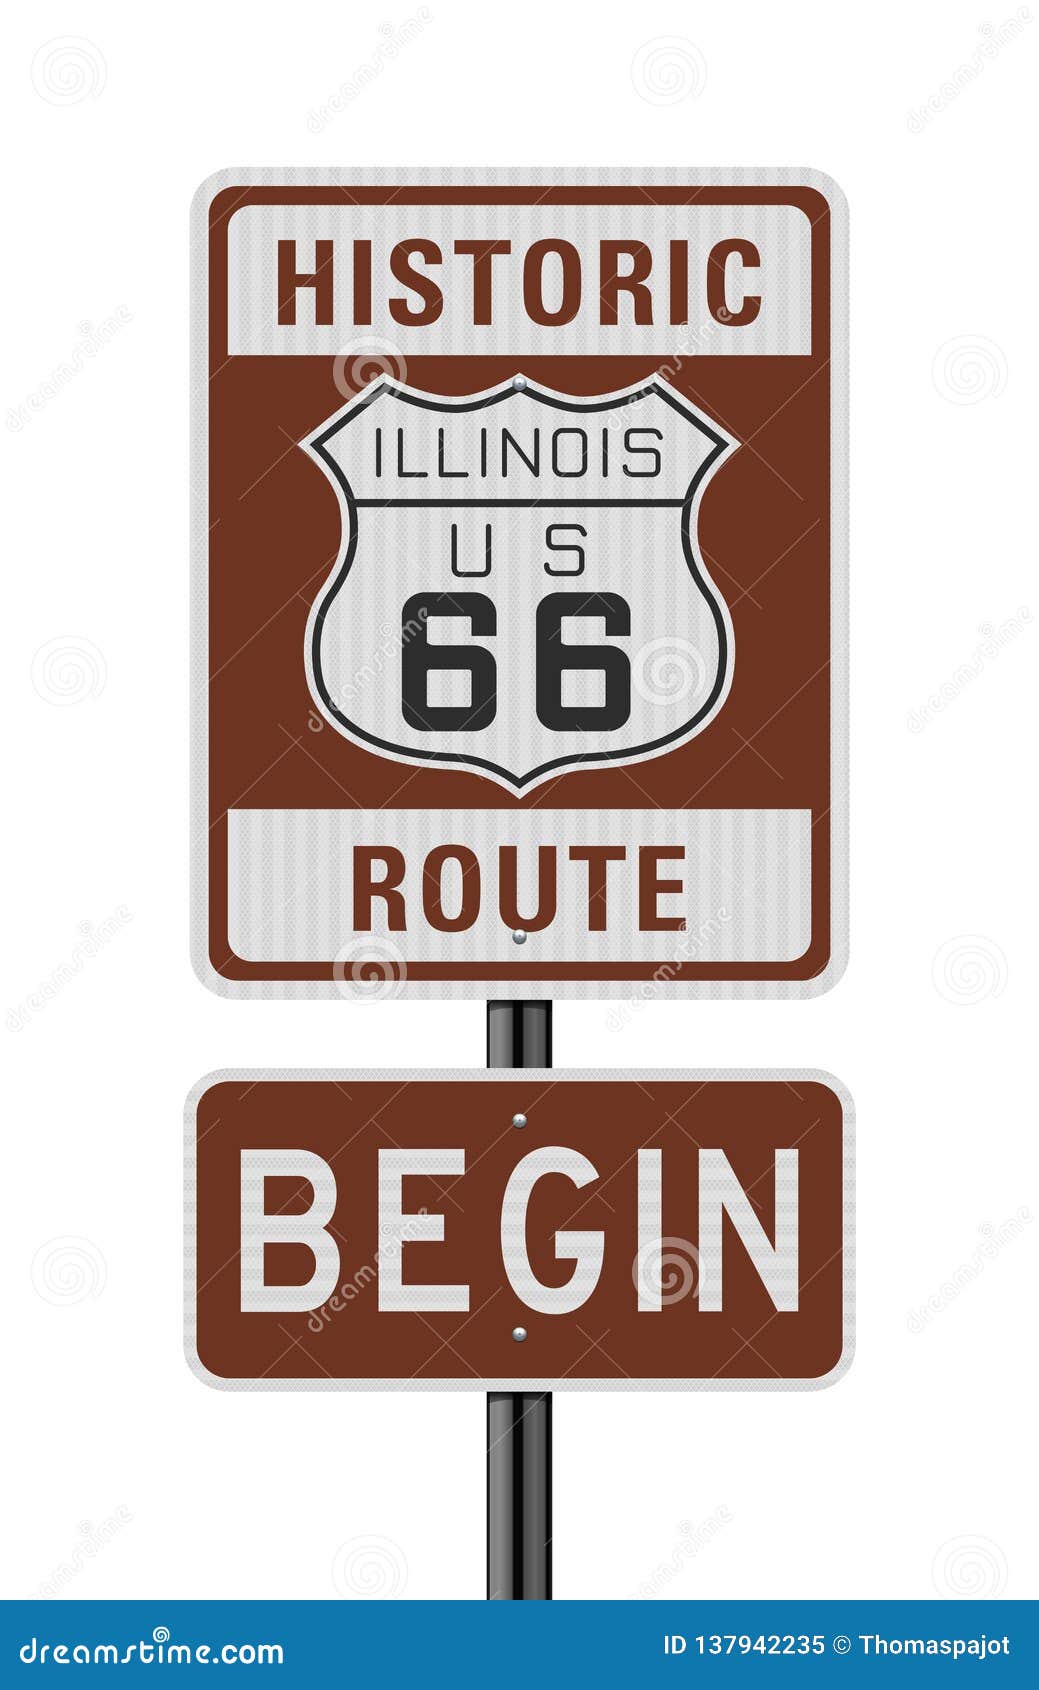 historic route 66 begin road sign